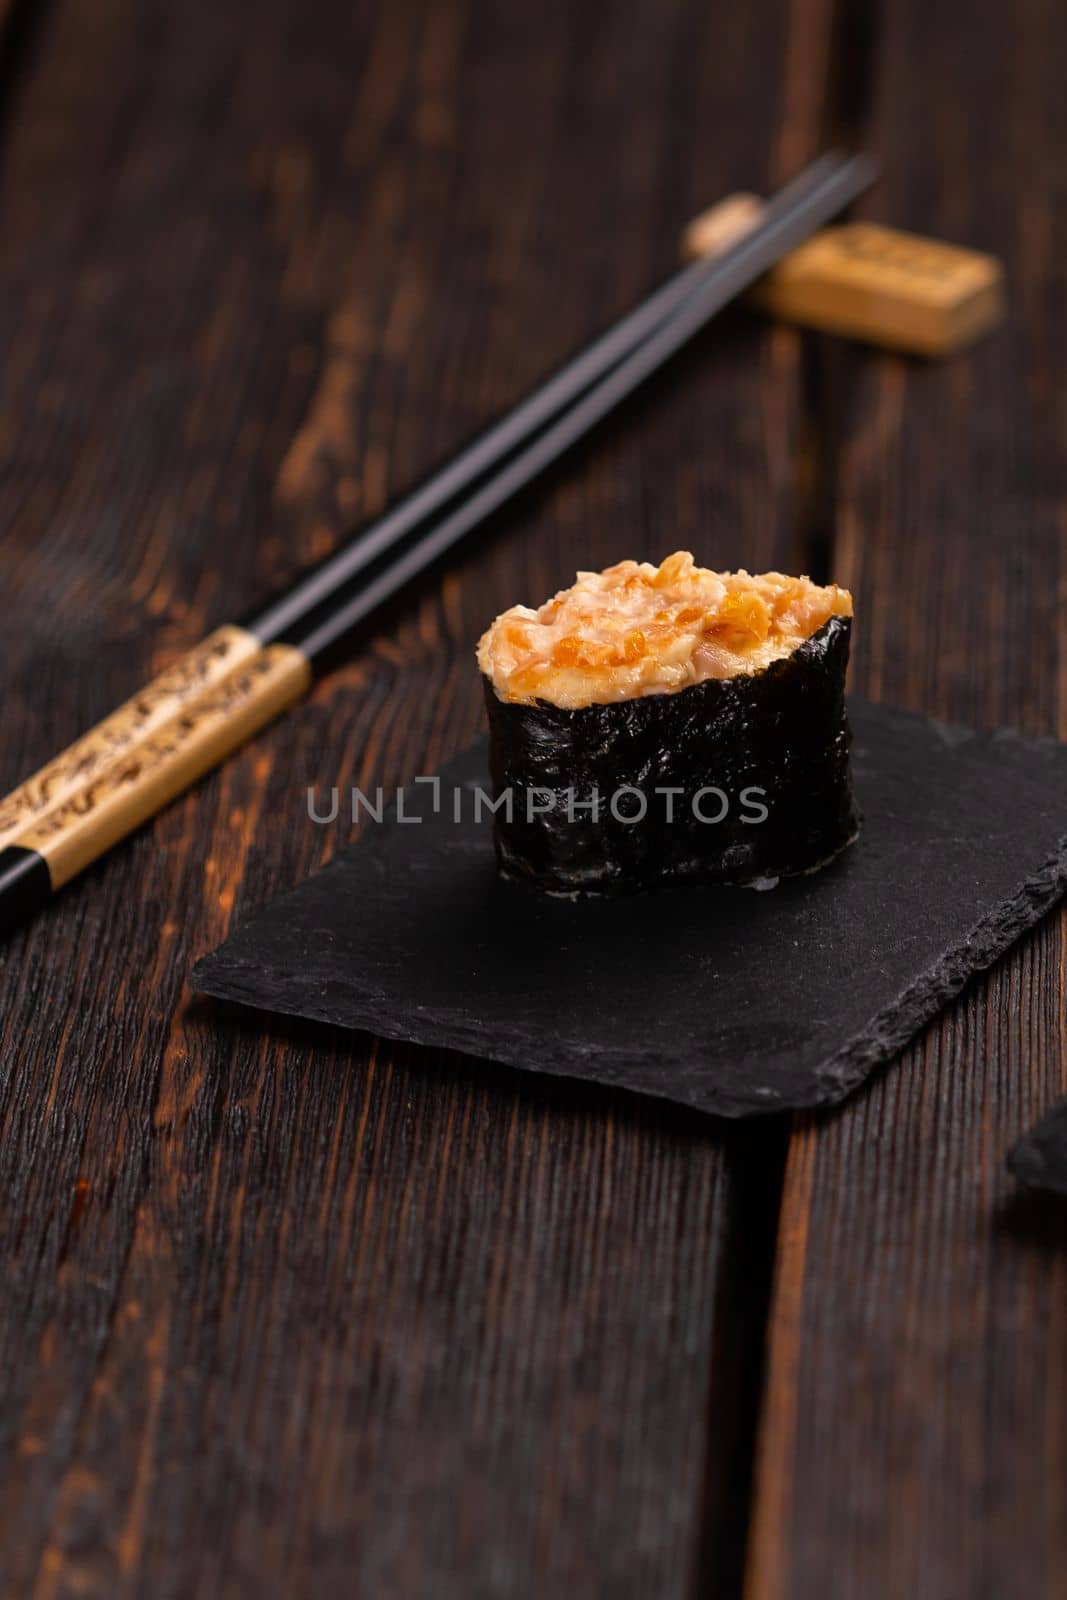 Set of Gunkan Maki Sushi with different types of fish salmon, scallop, perch, eel, shrimp and caviar on wooden table background. Sushi menu. Japanese food sushi set gunkan